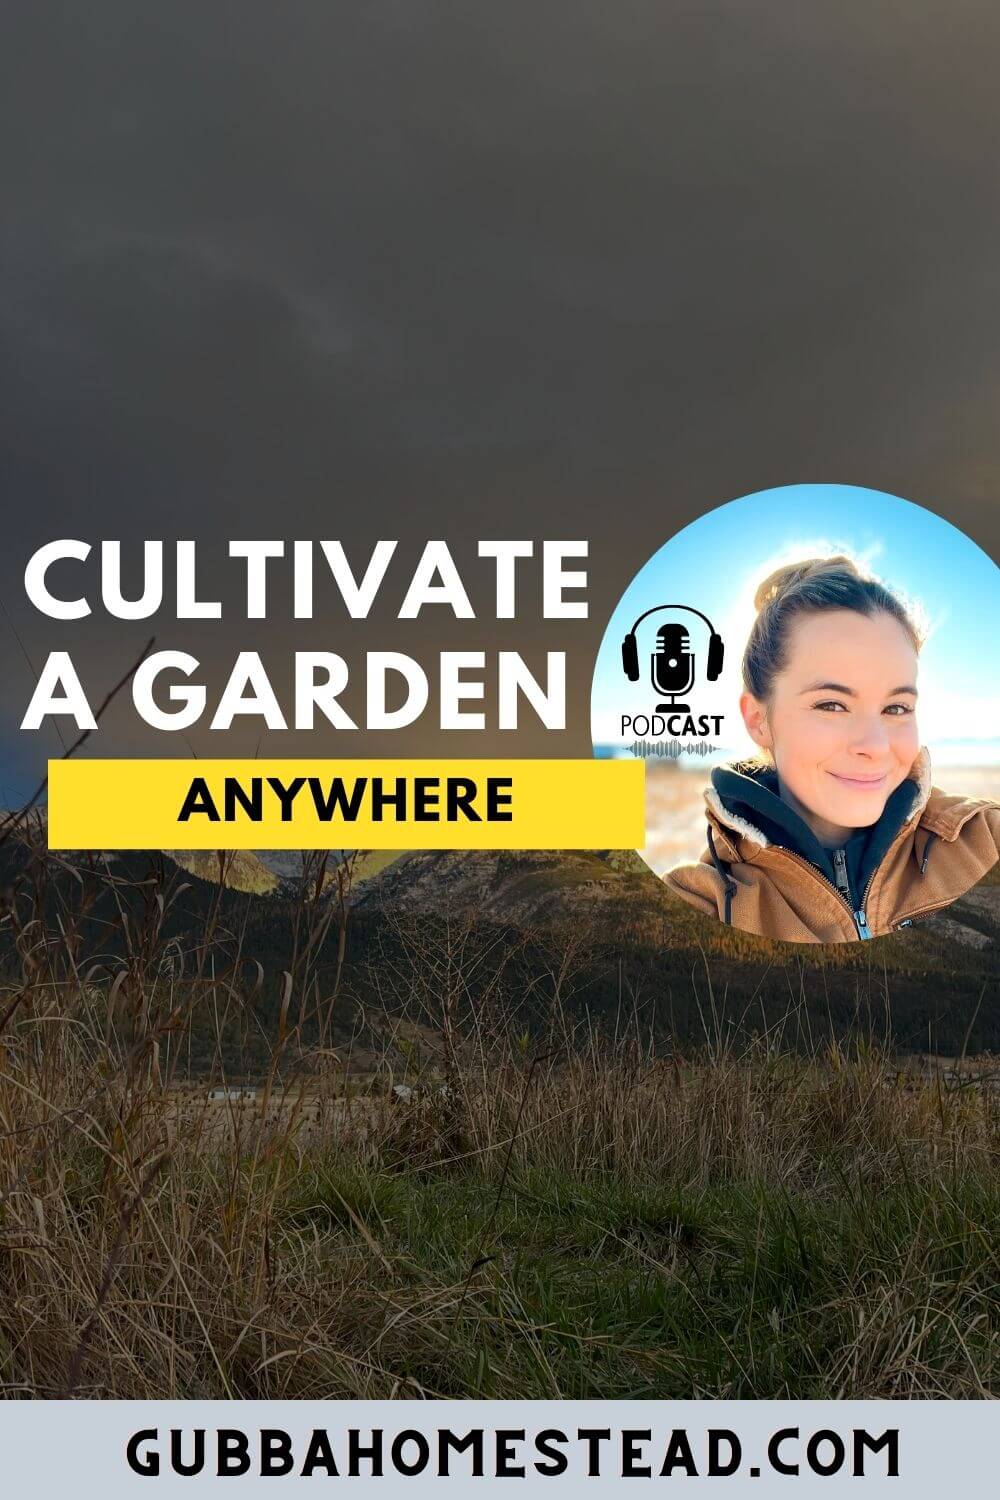 How to Plan and Cultivate a Garden from Anywhere